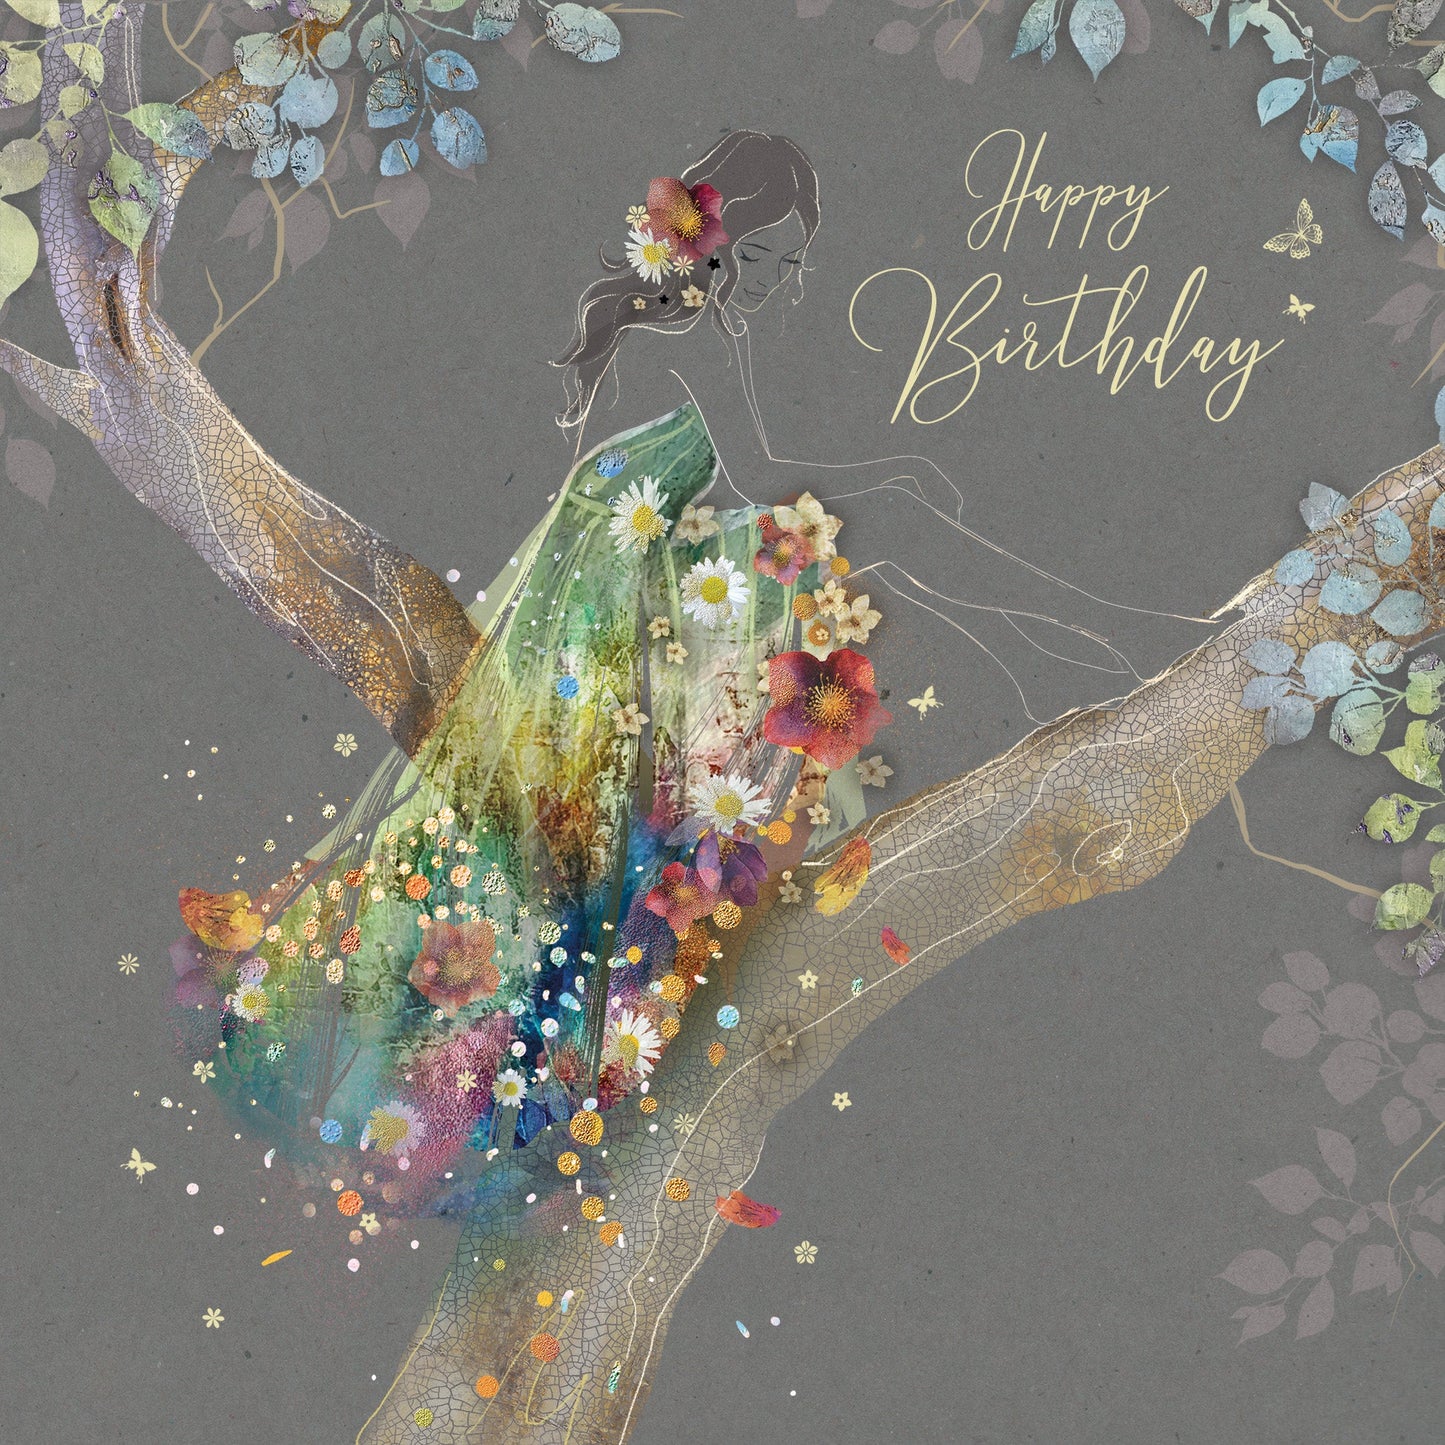 Woman In A Tree Birthday Greetings Card